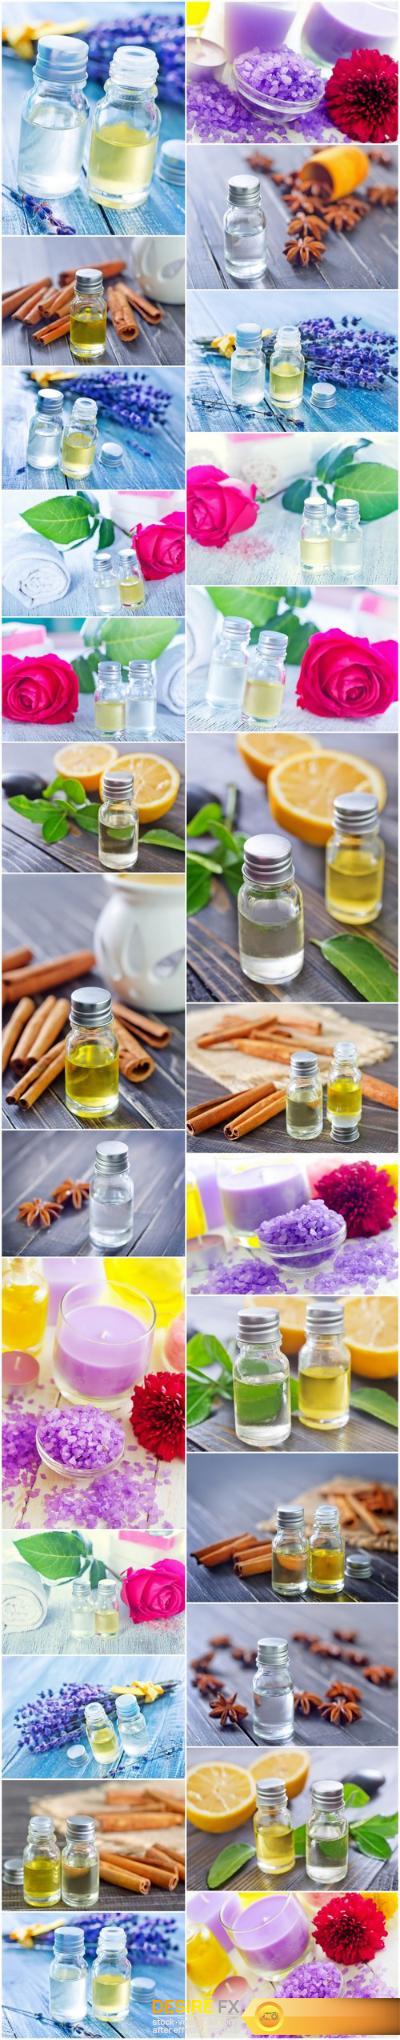 Sea salt, soap, candle and aroma oil 4 - Set of 26xUHQ JPEG Professional Stock Images